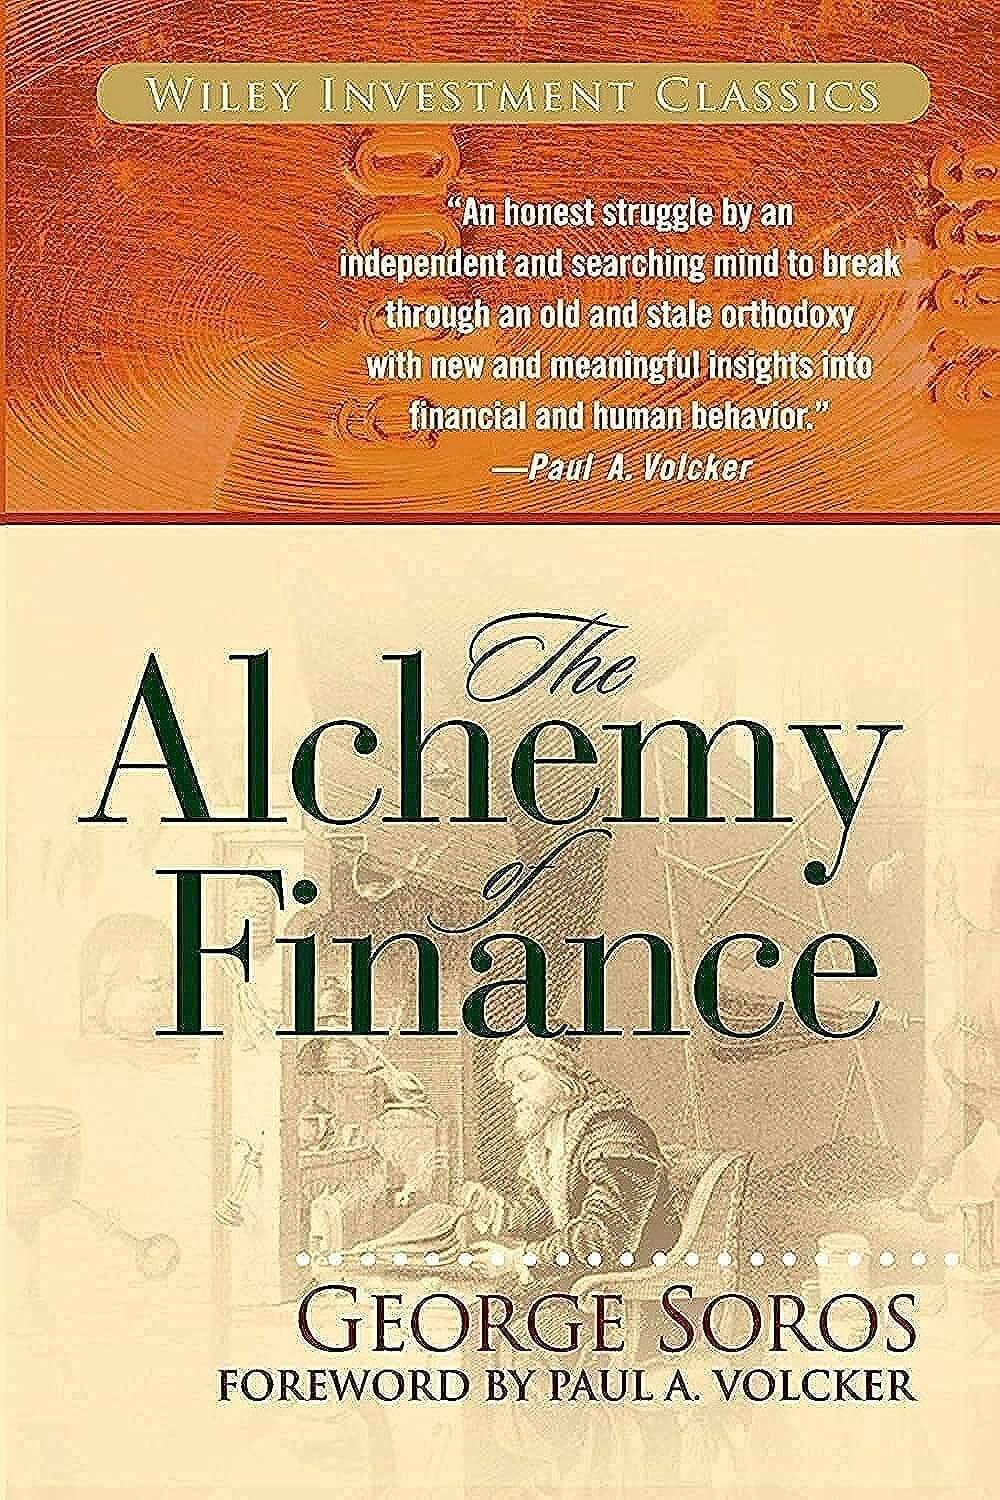 A Master Trader's Market-Moving Insights: George Soros' Alchemy of Finance